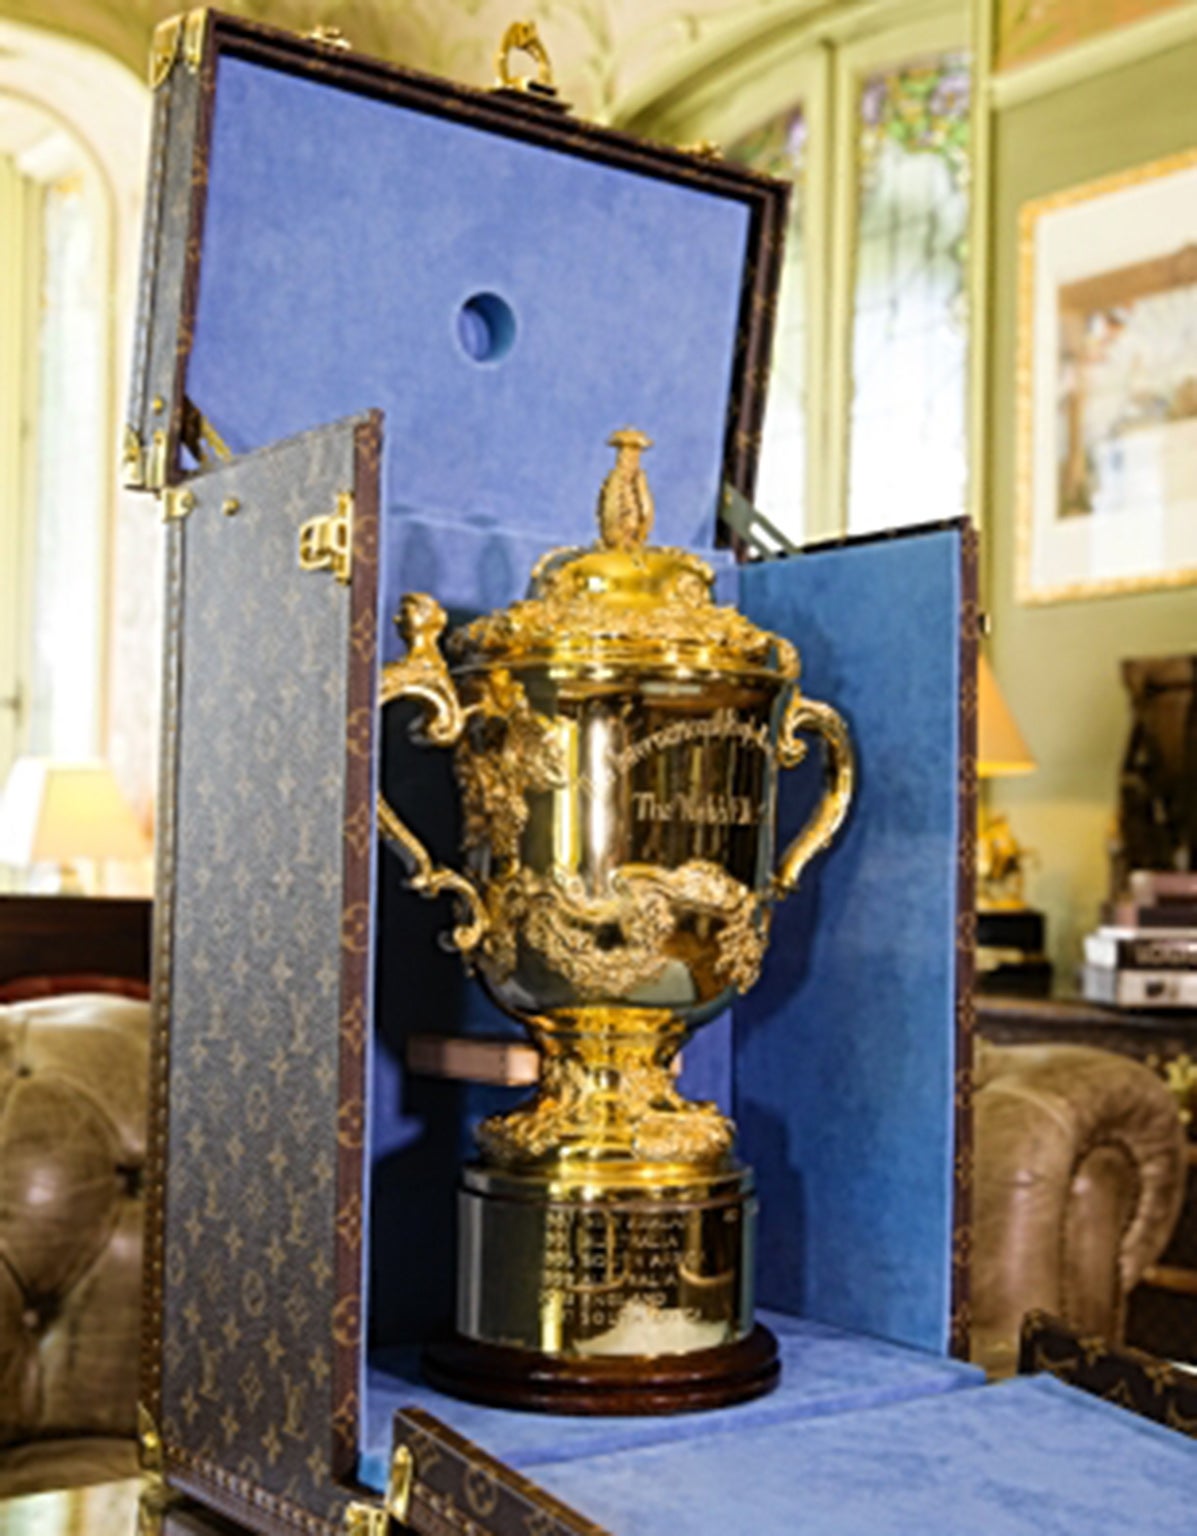 Eales will carry out the Webb Ellis Cup at Twickenham